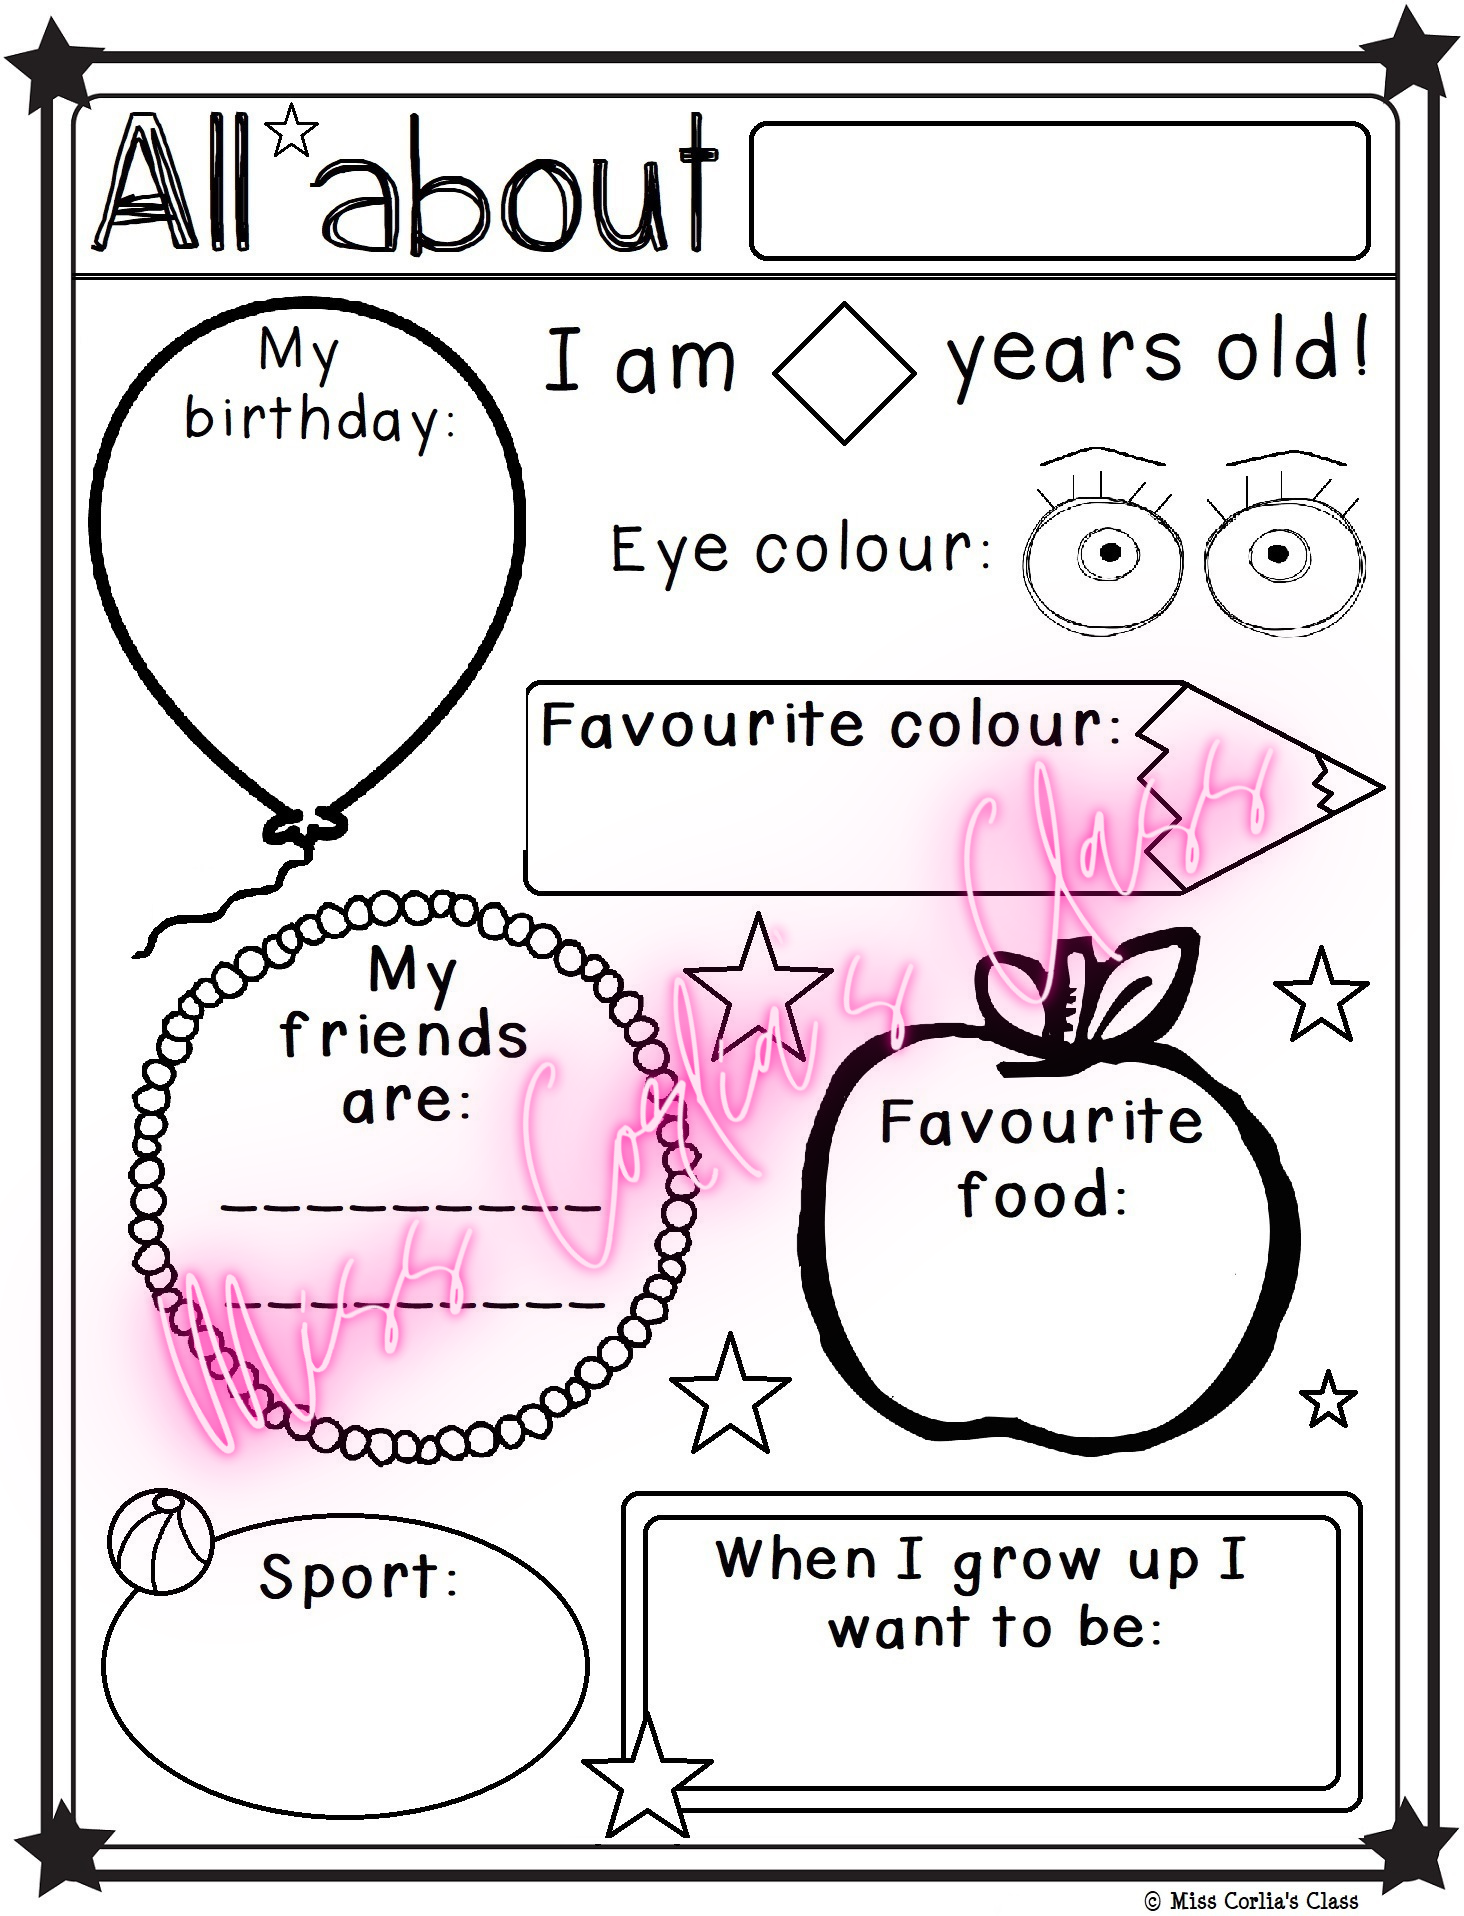 Free Printable All About Me Worksheet